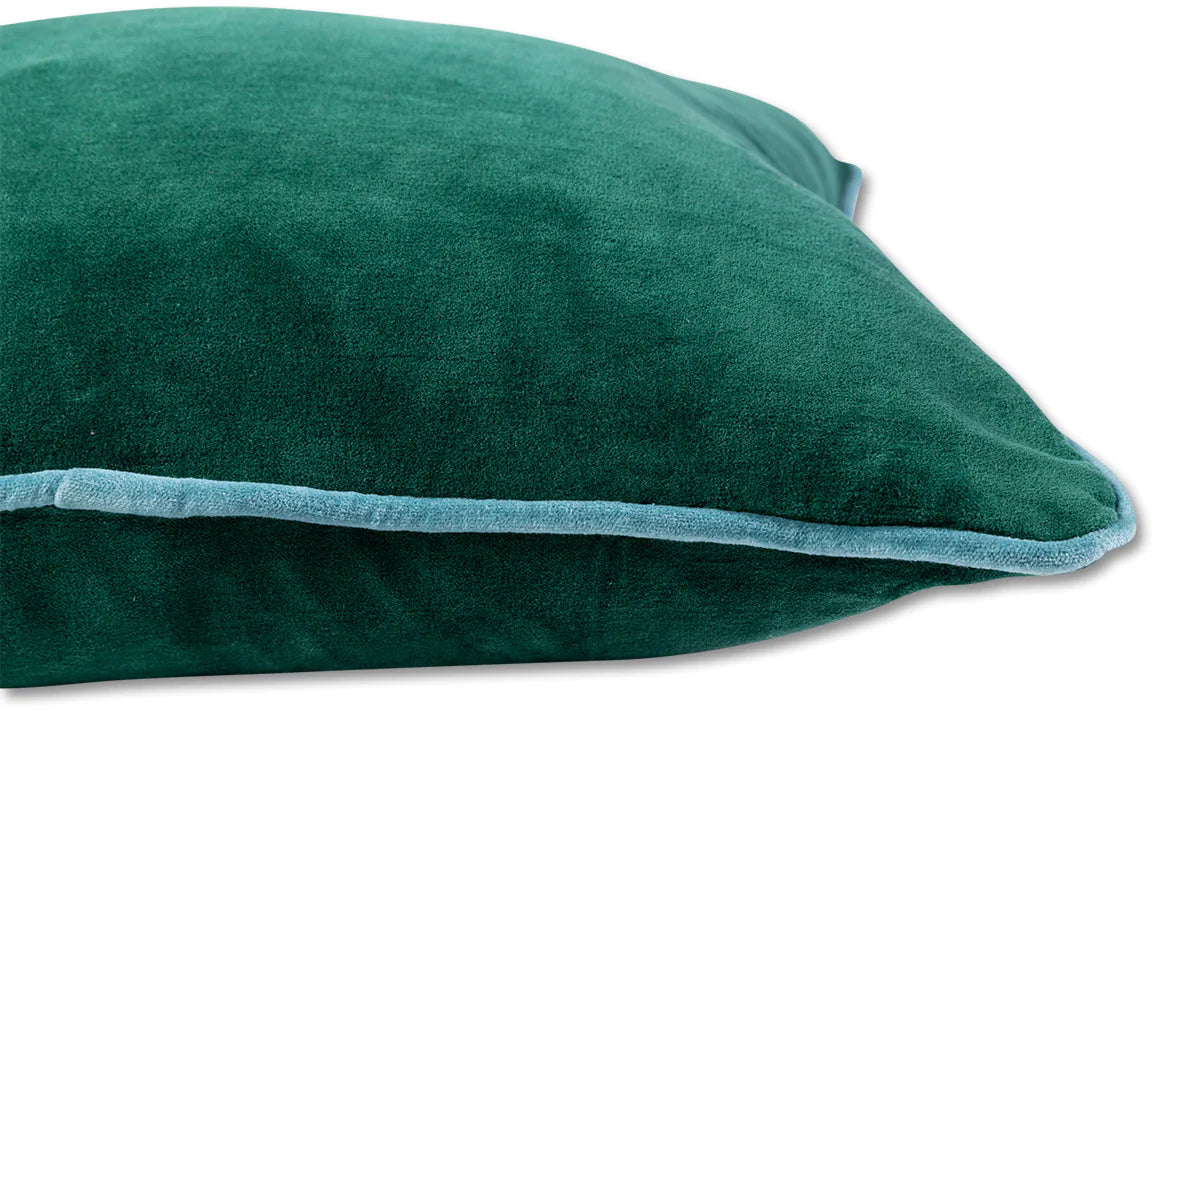 Velvet Pillow with insert- 2 Color Options Available